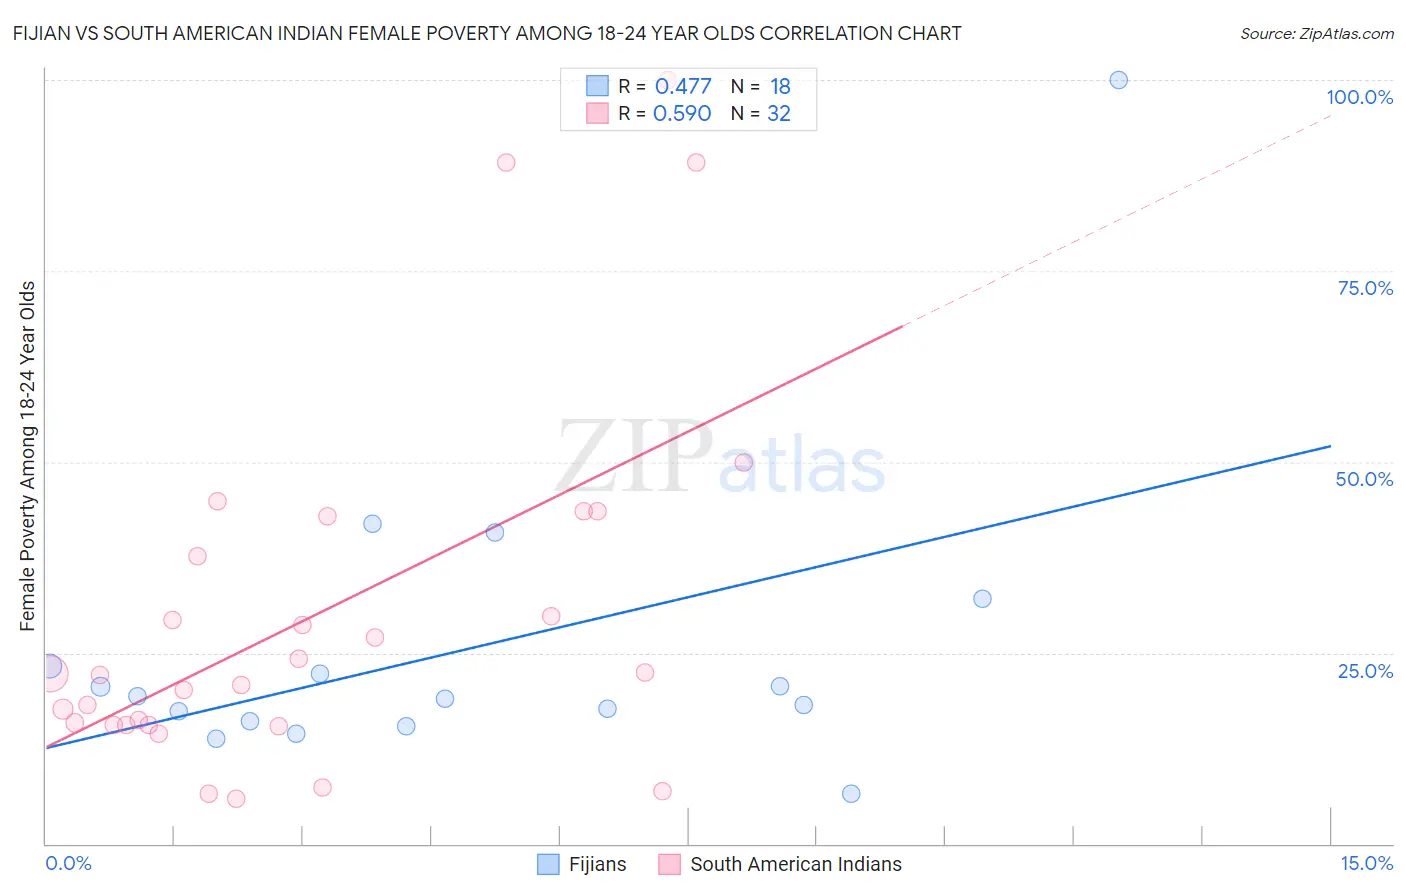 Fijian vs South American Indian Female Poverty Among 18-24 Year Olds